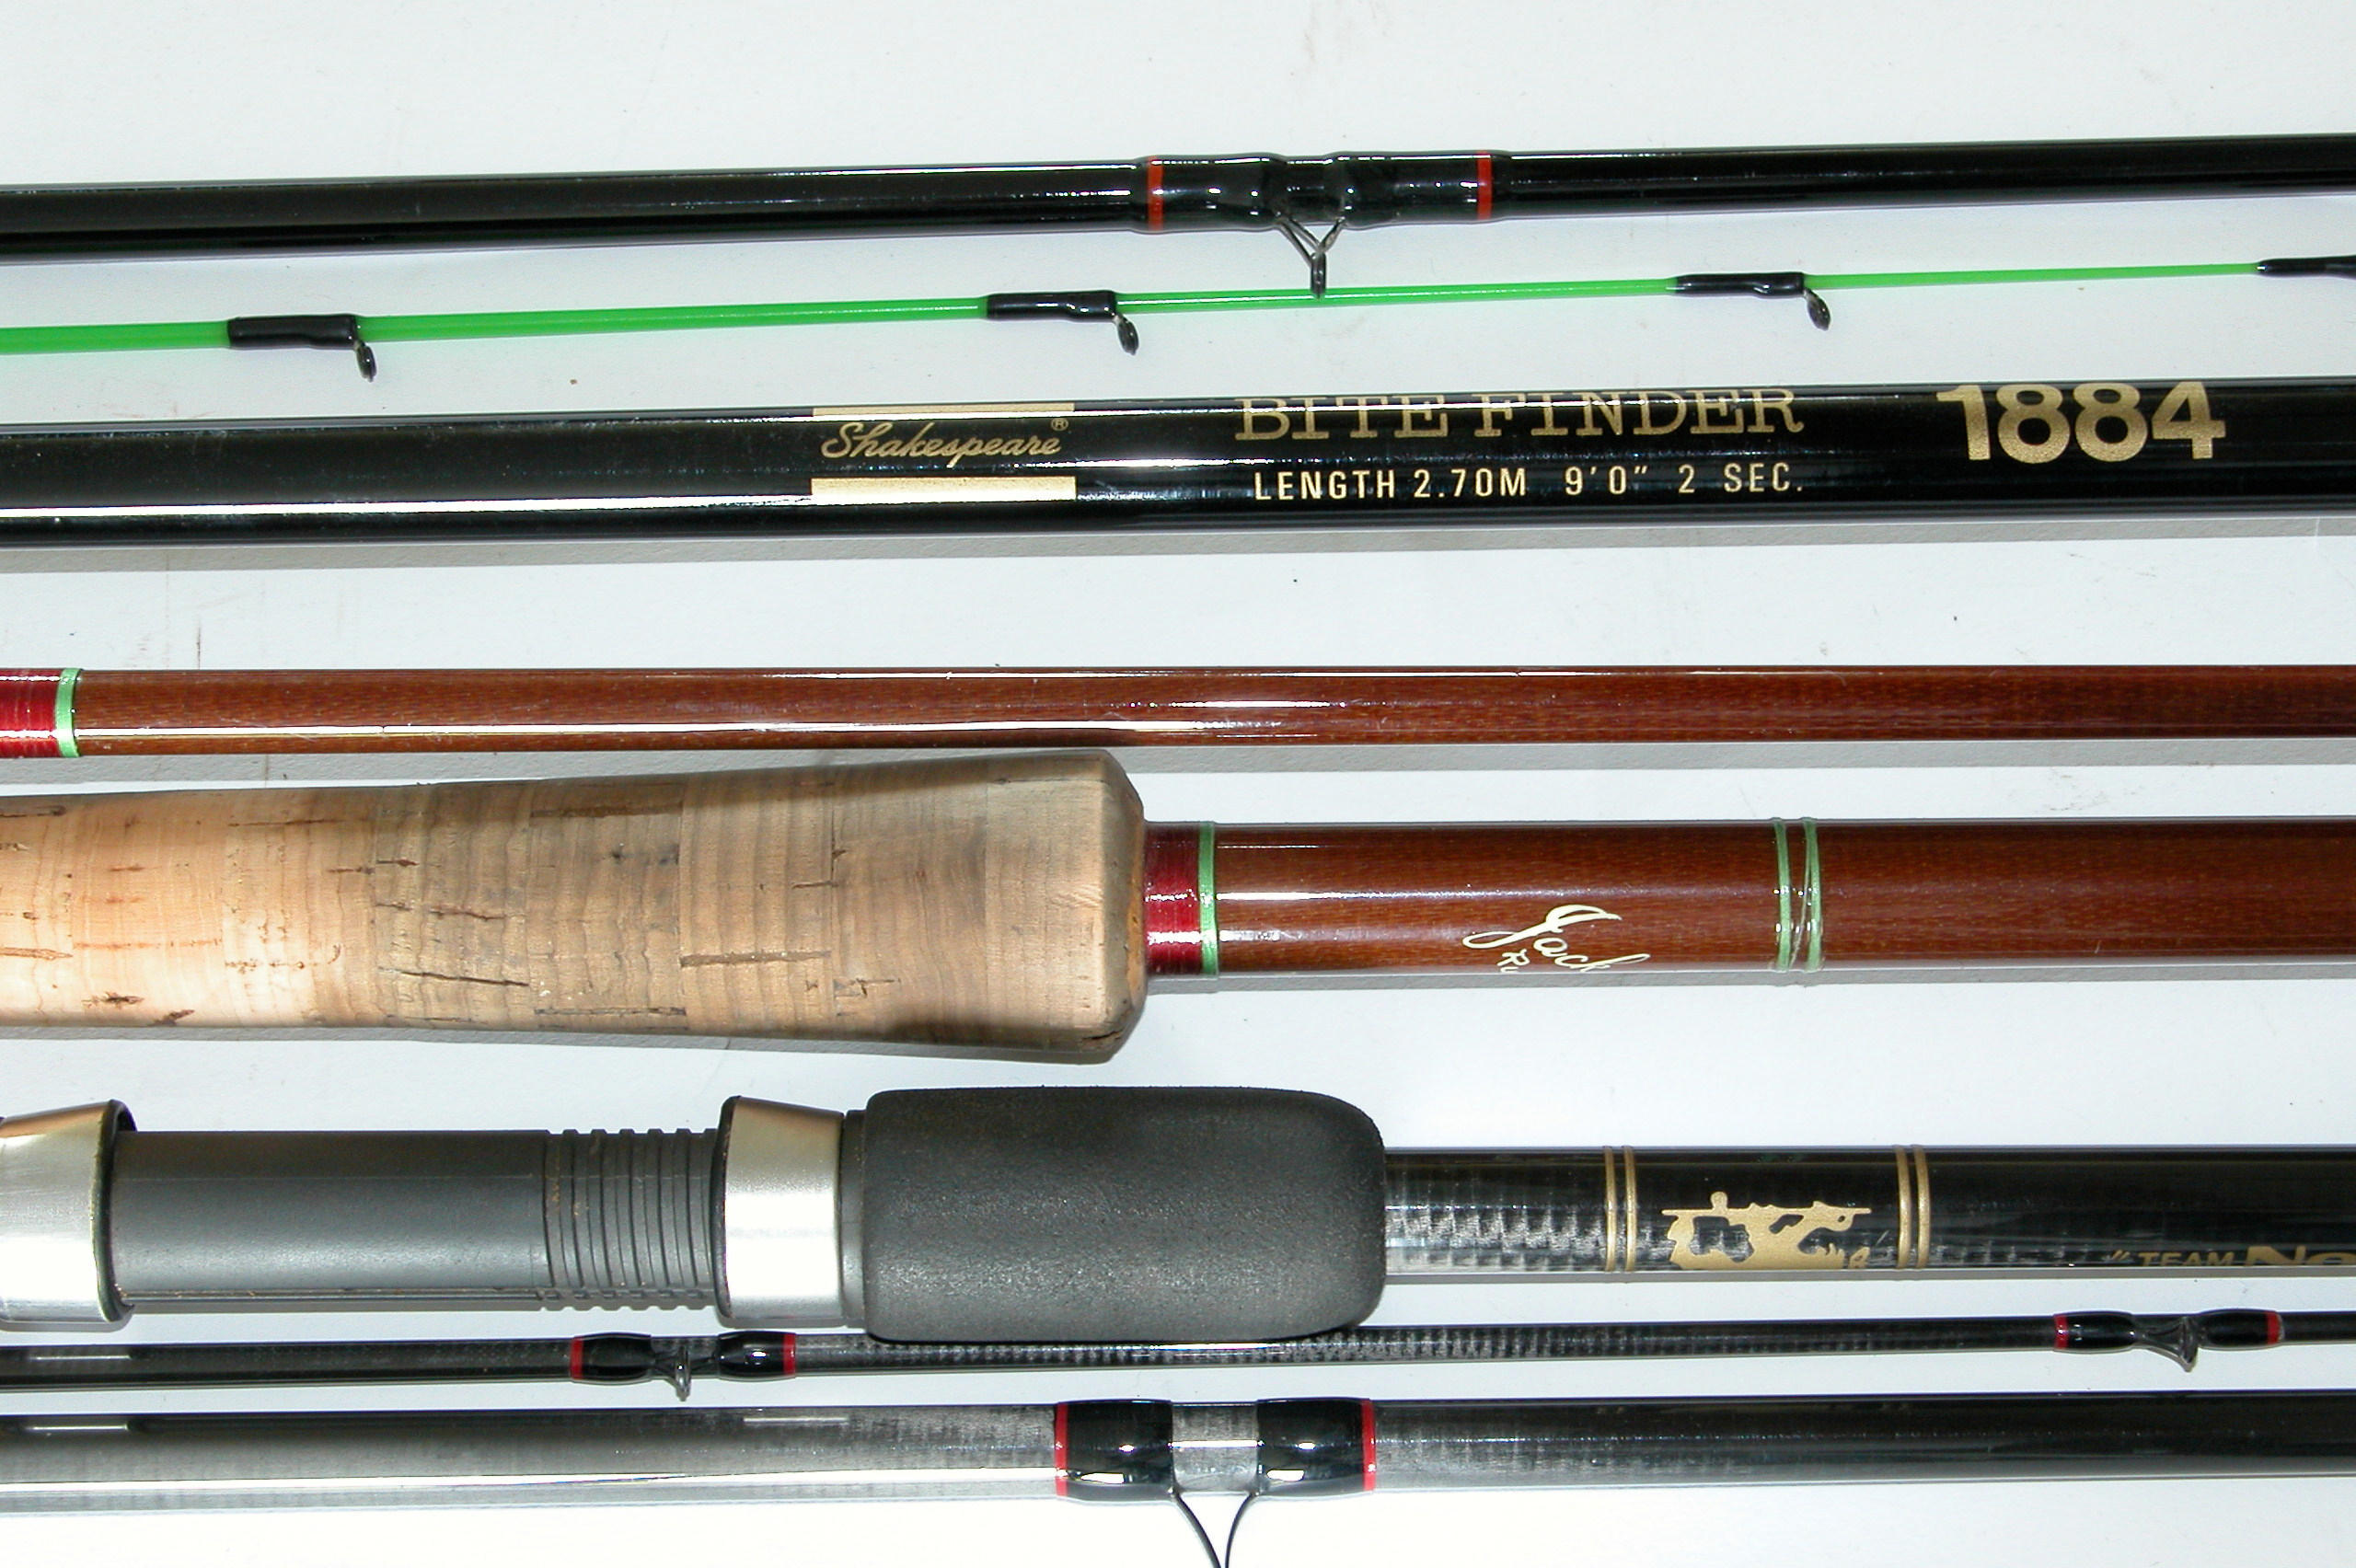 Auction - The Angling Sale incorporating The Late John Simpson's Fishing  Memorabilia at 14.10.2005 - LotSearch